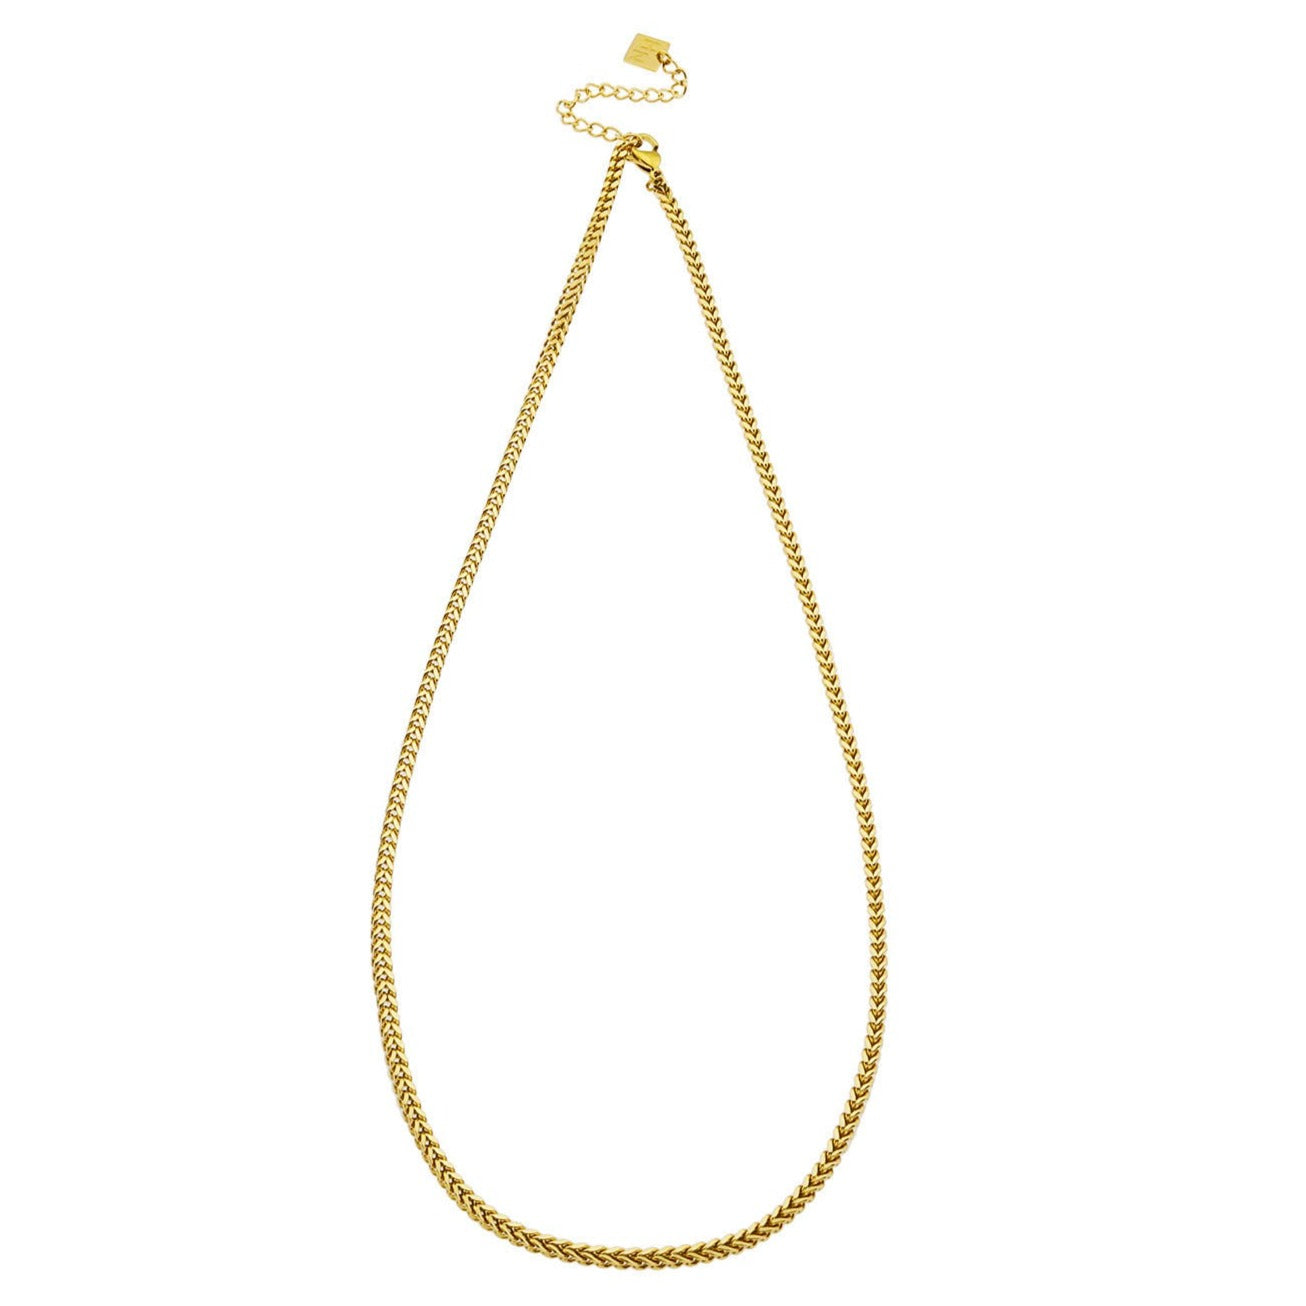 link-chain | classic-necklace | basic-chain-necklace | hackney nine | hackneynine | necklace | hoops | bracelets | earrings | charms | studs_earrings | jewellery | jewellery-store | shop-jewelry | gold-jewellery | dressy_jewellery | classy_ jewellery | on_trend_jewellery | fashion_ jewellery | cool_jewellery | affordable_jewellery | designer_jewellery | vintage_jewellery | heart_jewellery | gifts-for-her | gifts-for-mum | gifts-for-girls | gifts-for-females | dainty-jewellery | bridesmaid-gift